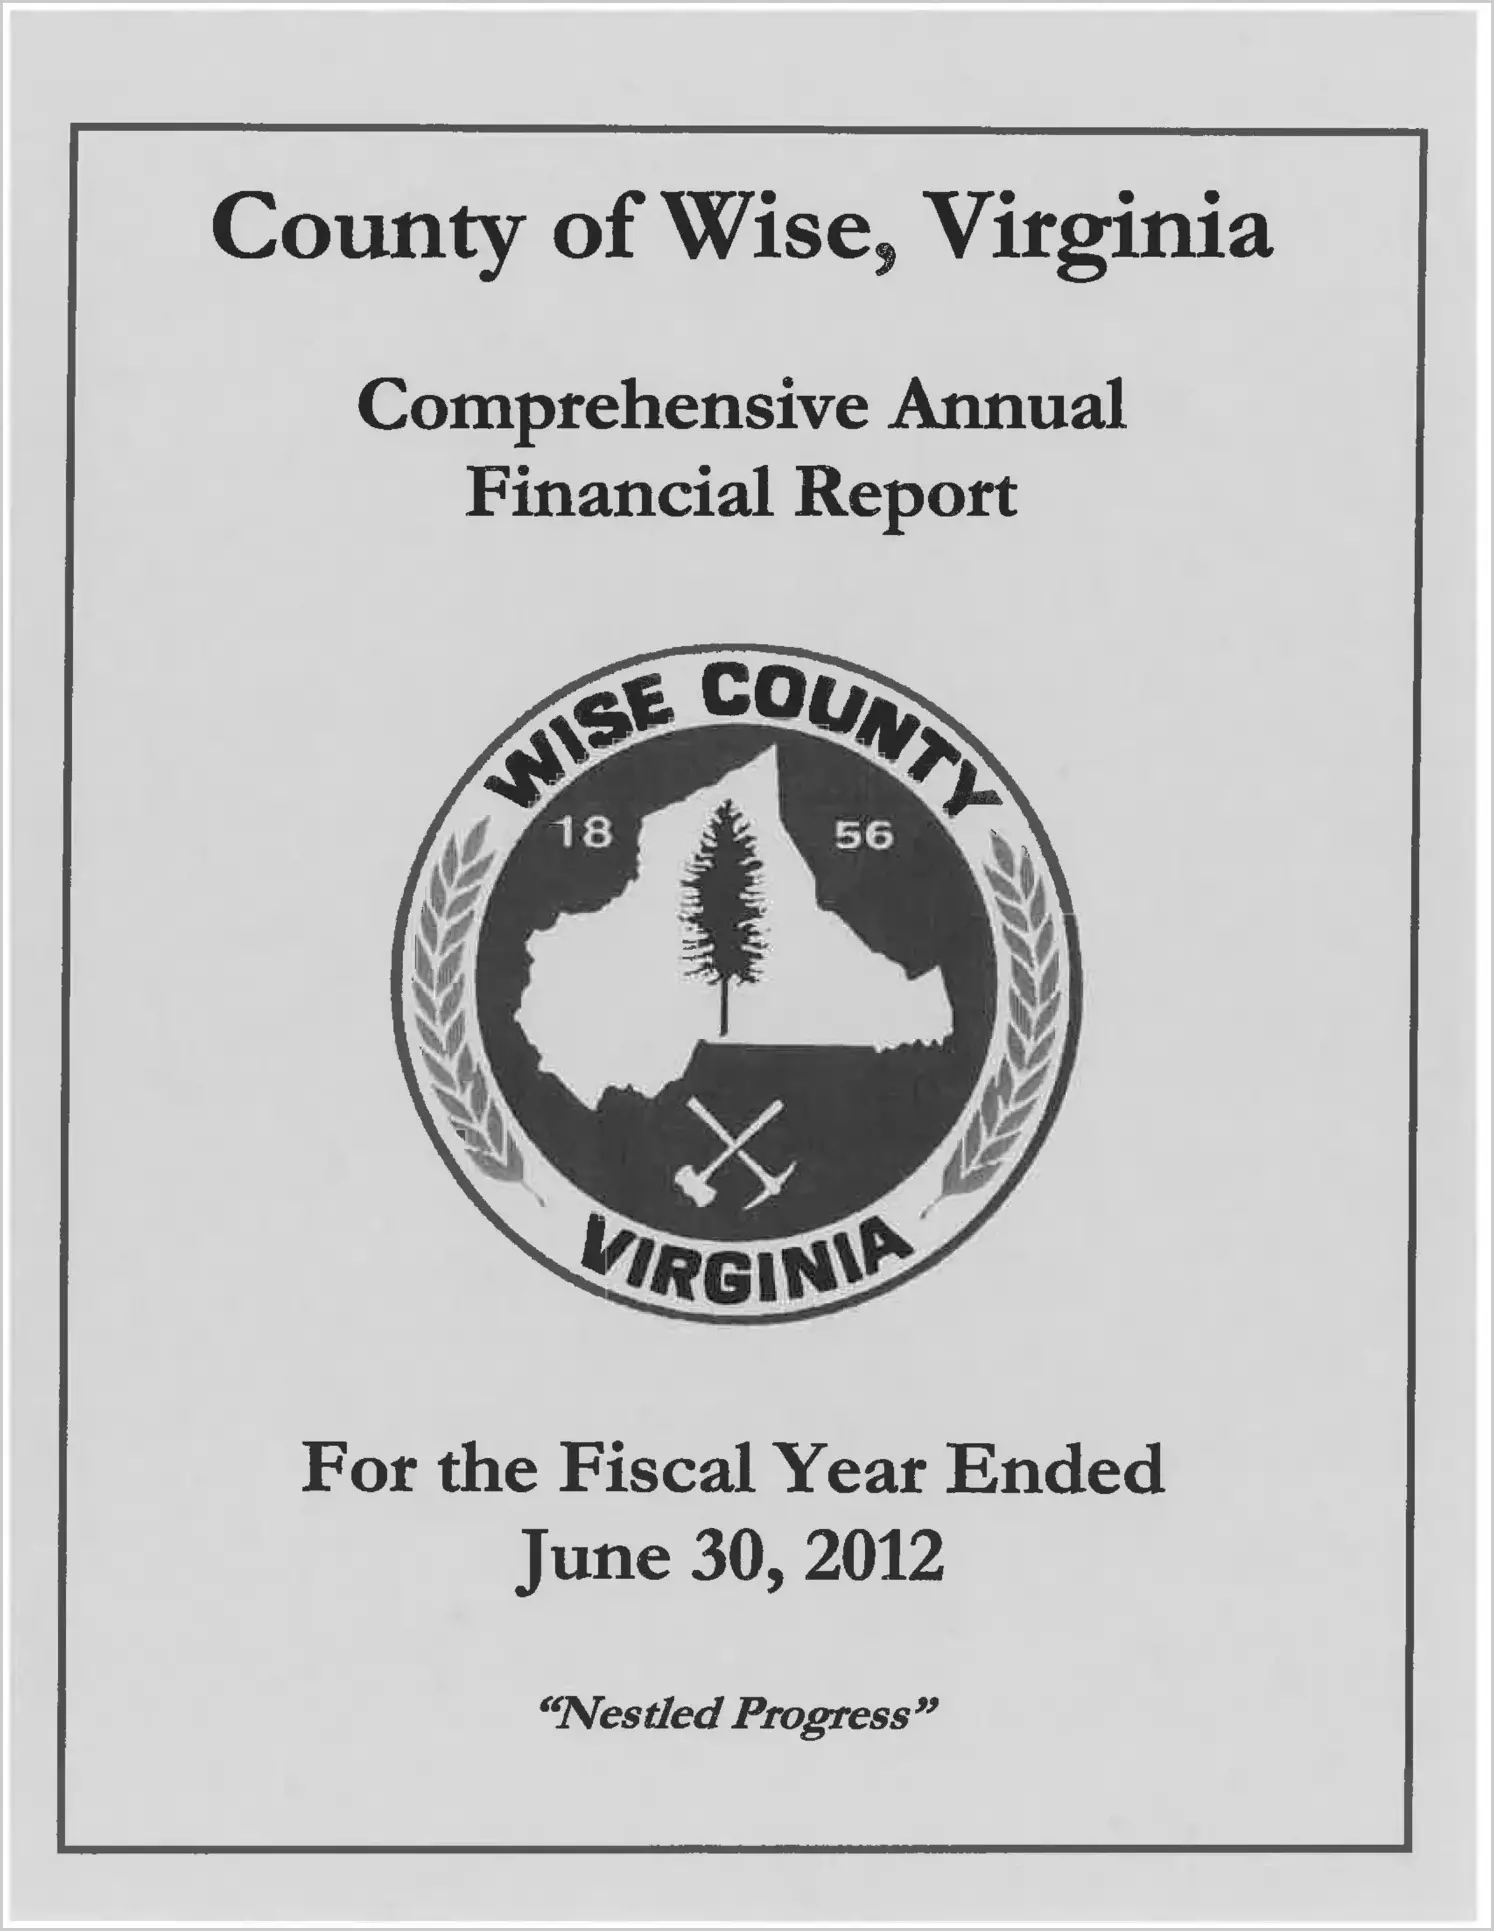 2012 Annual Financial Report for County of Wise